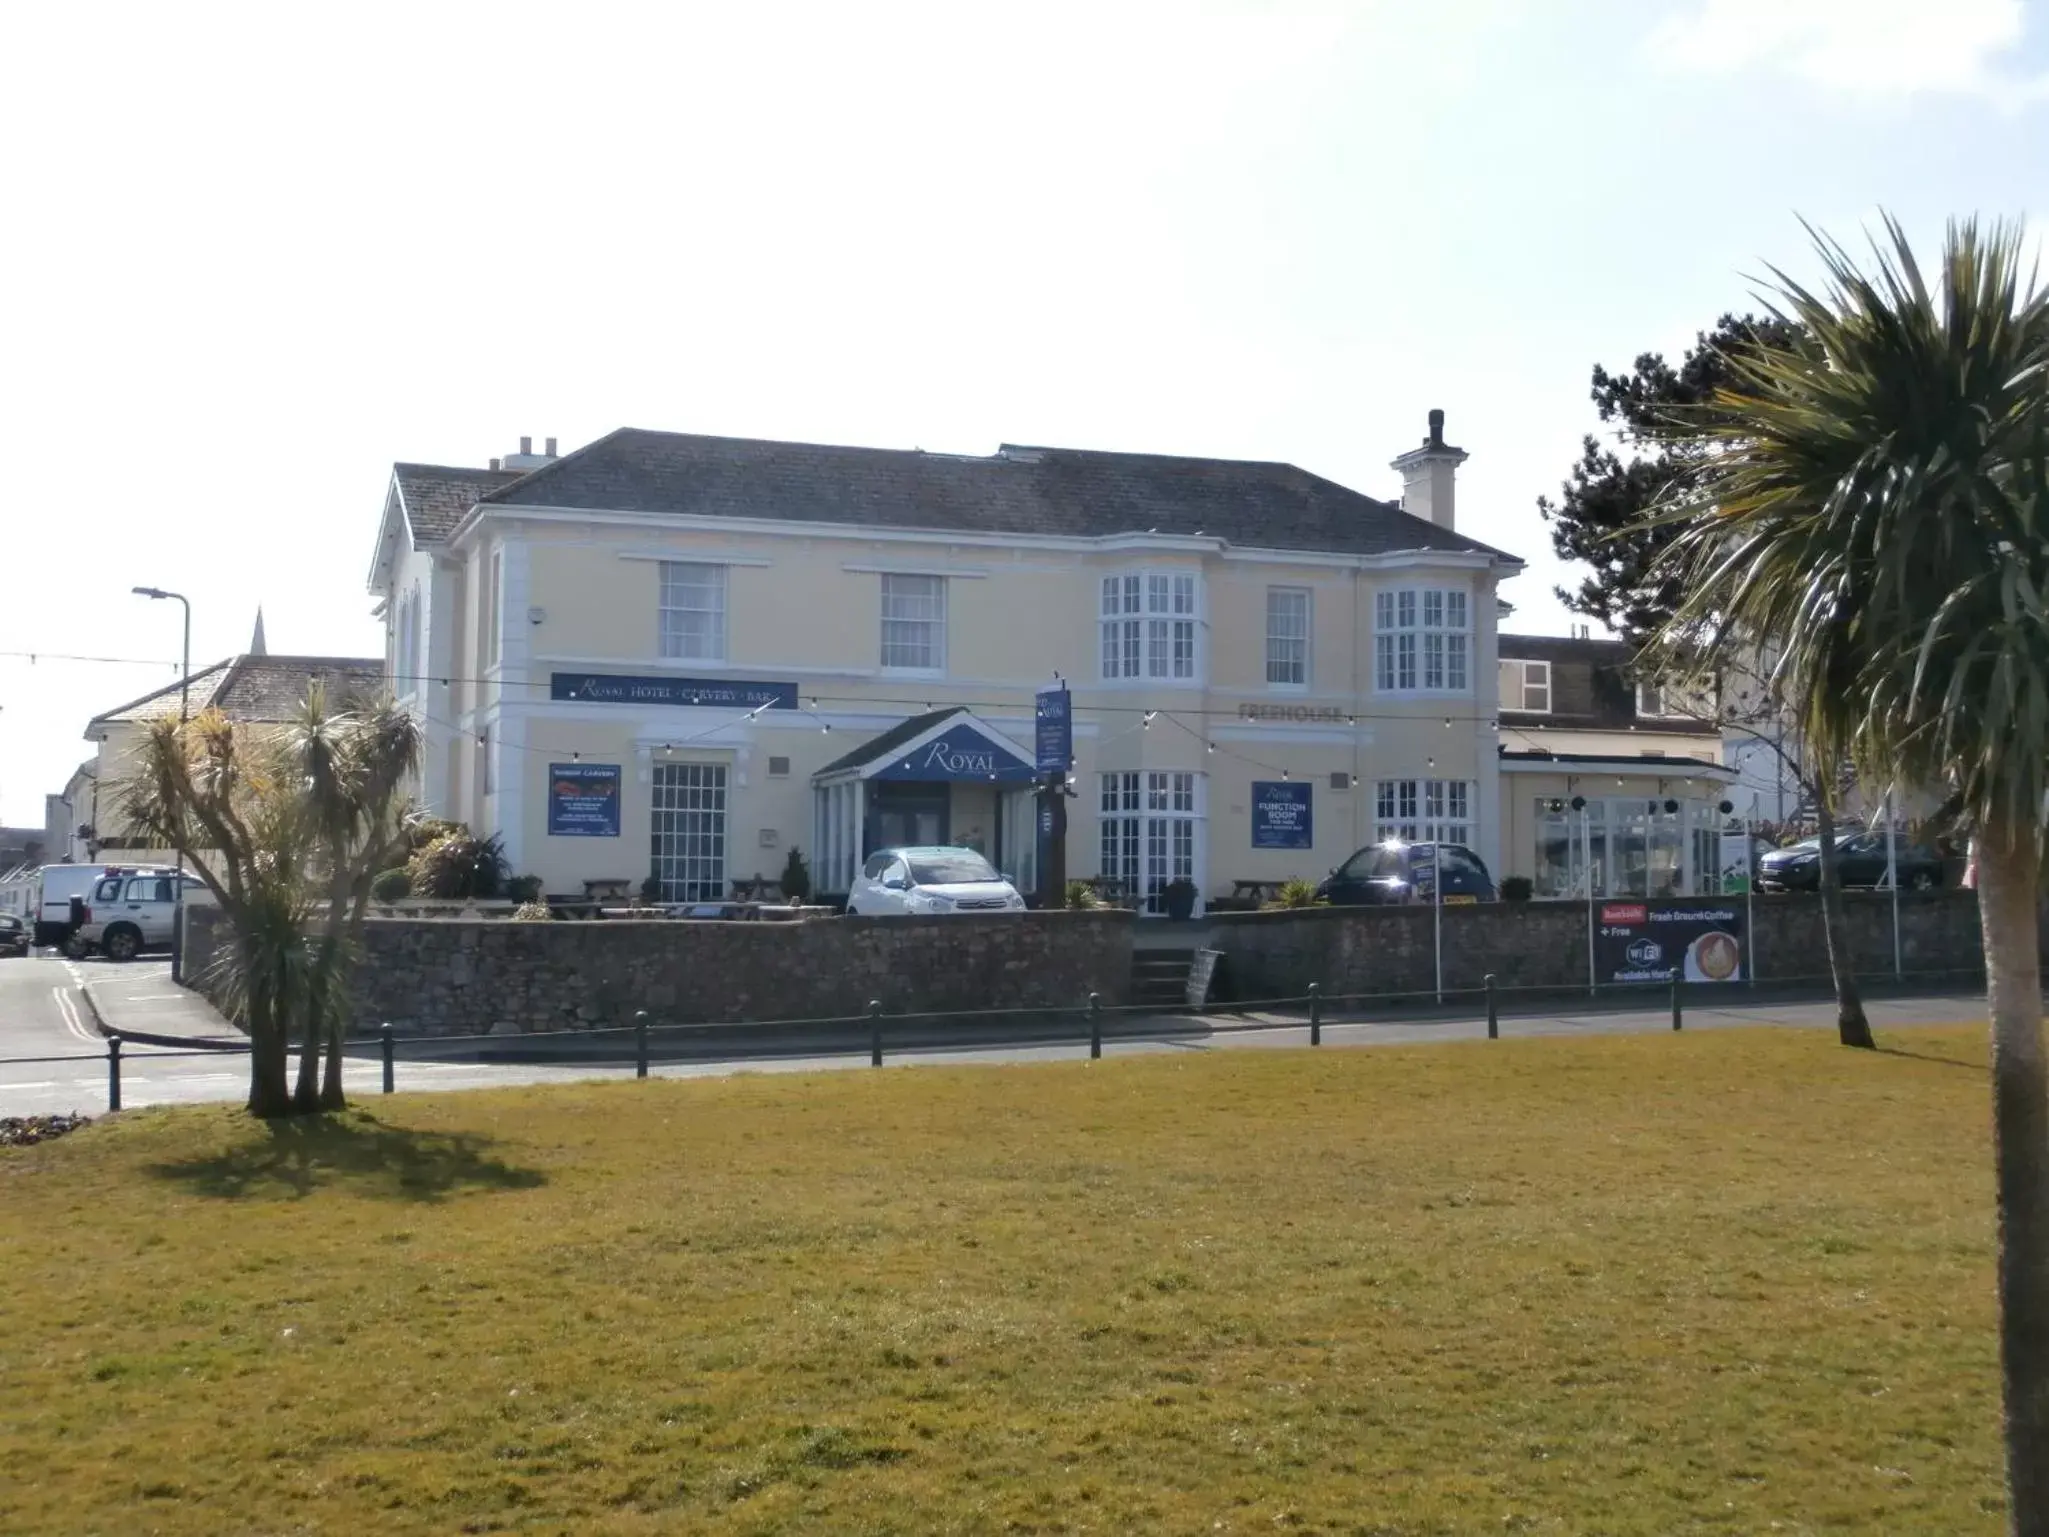 Facade/entrance, Property Building in Babbacombe Royal Hotel and Carvery